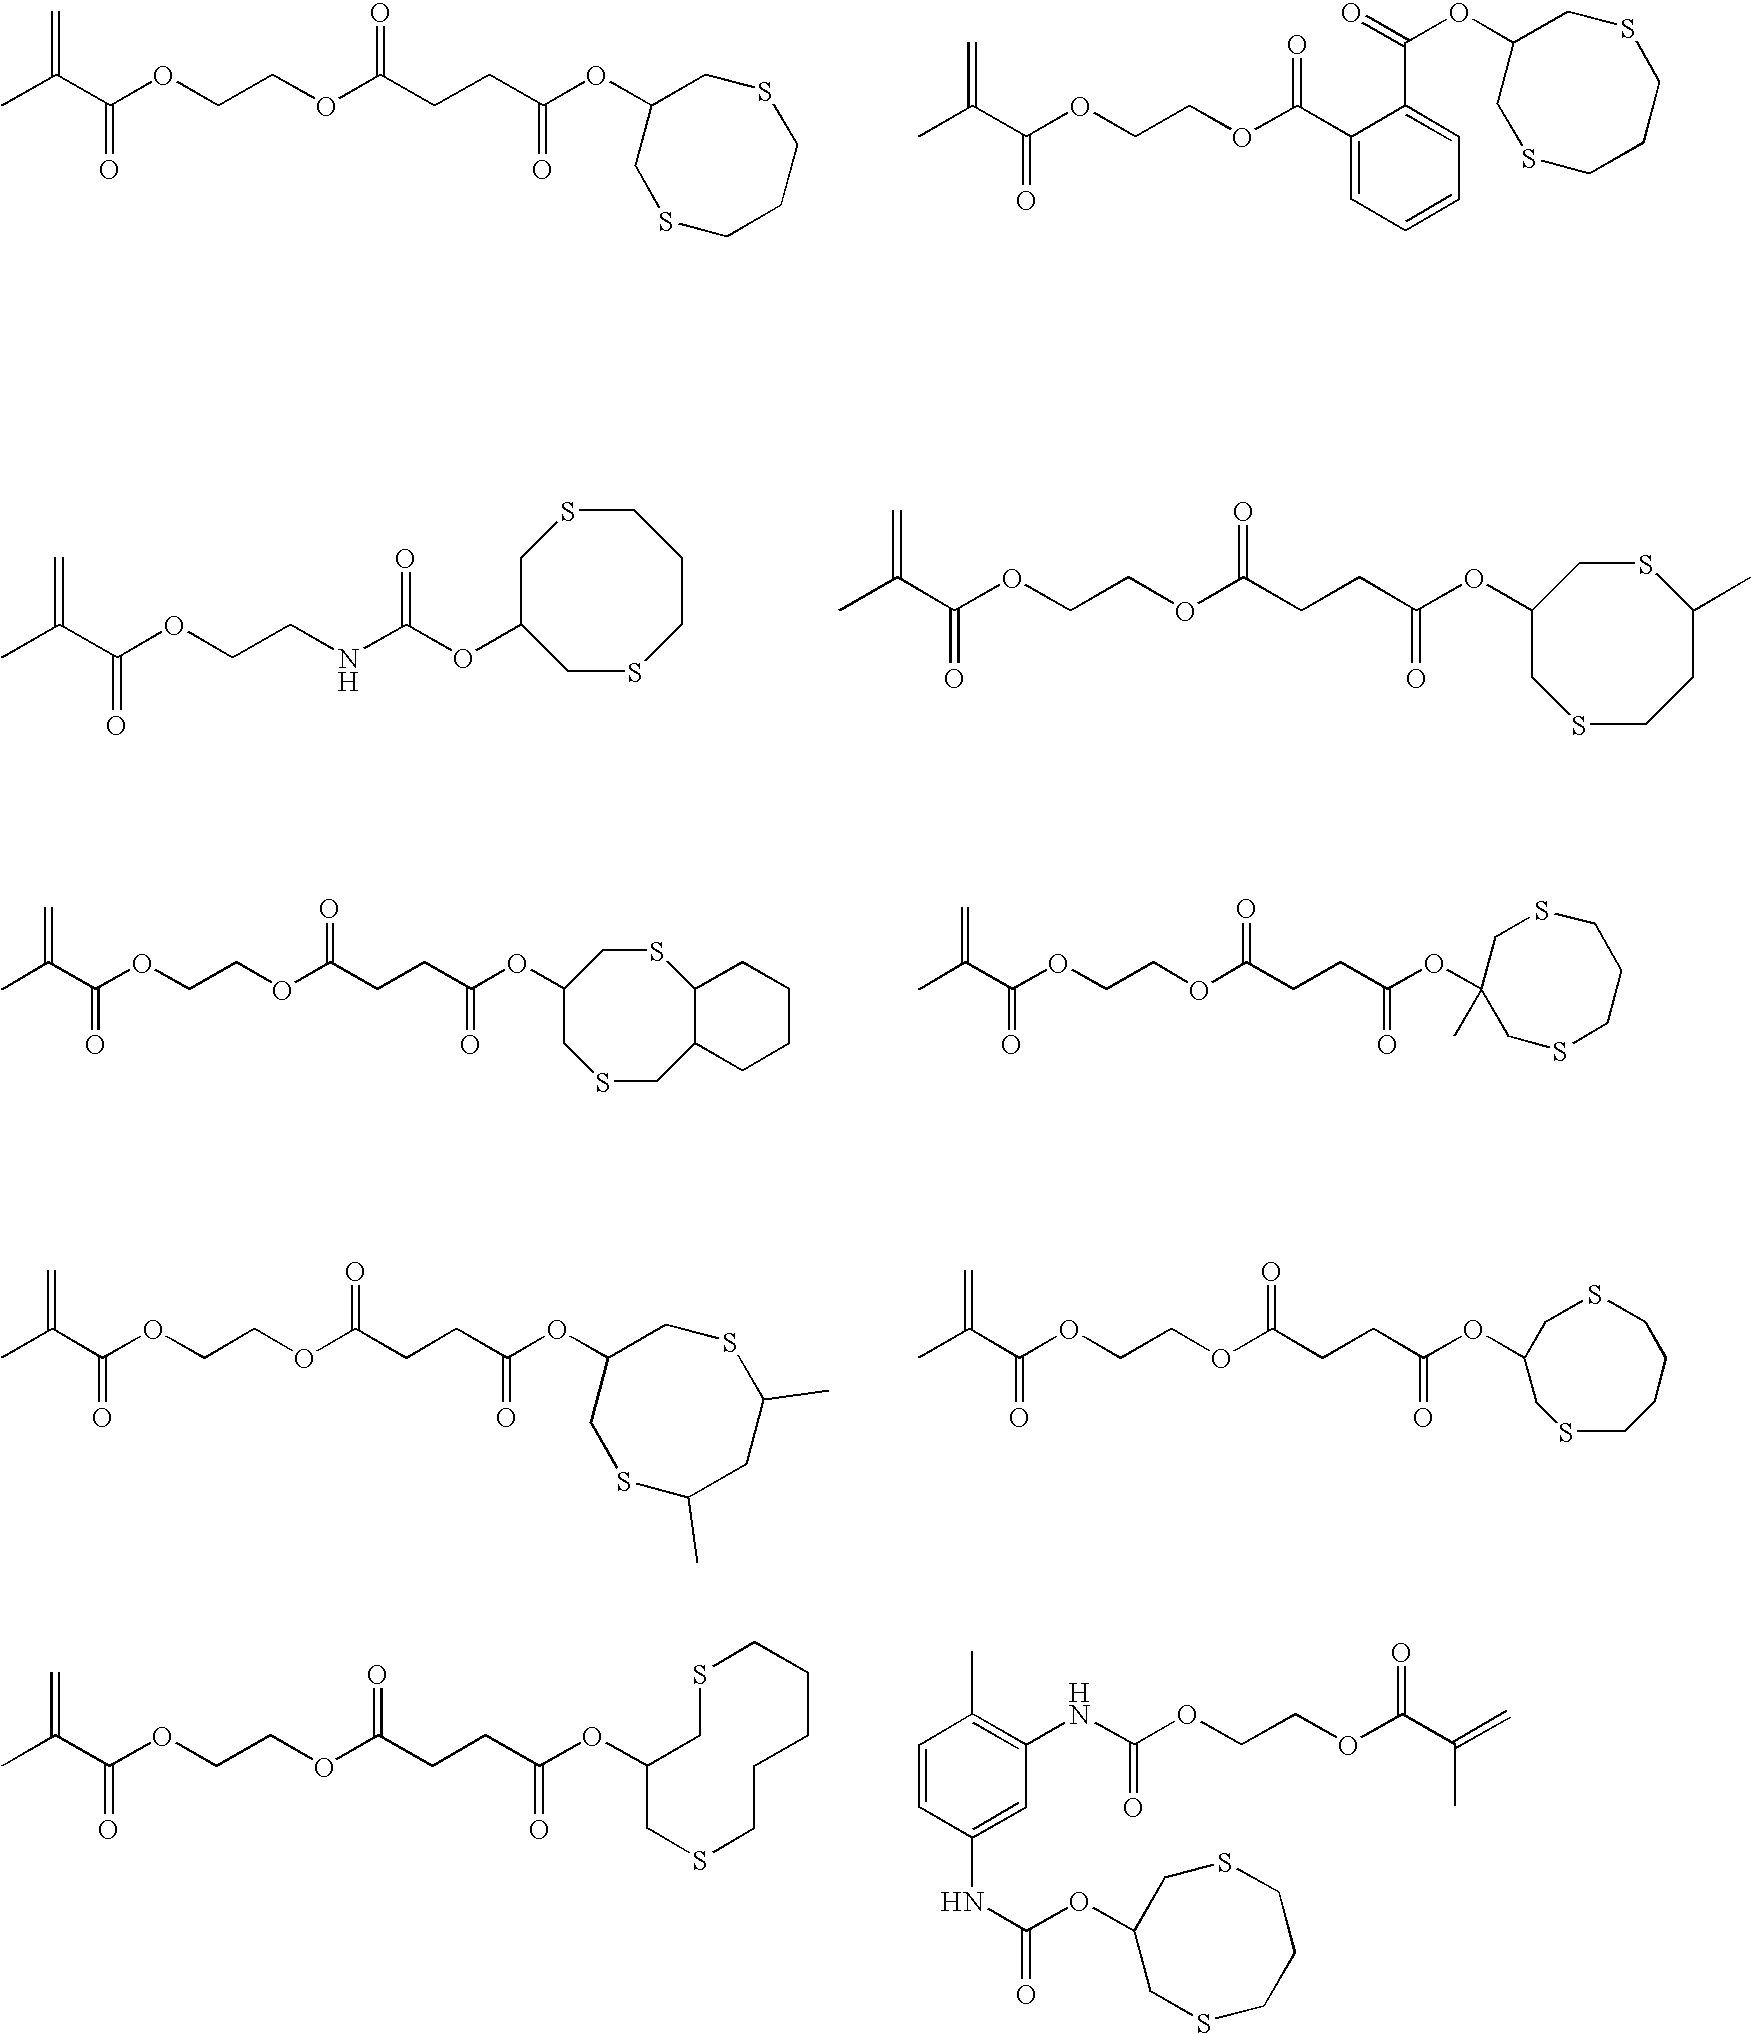 Curable compositions containing dithiane monomers